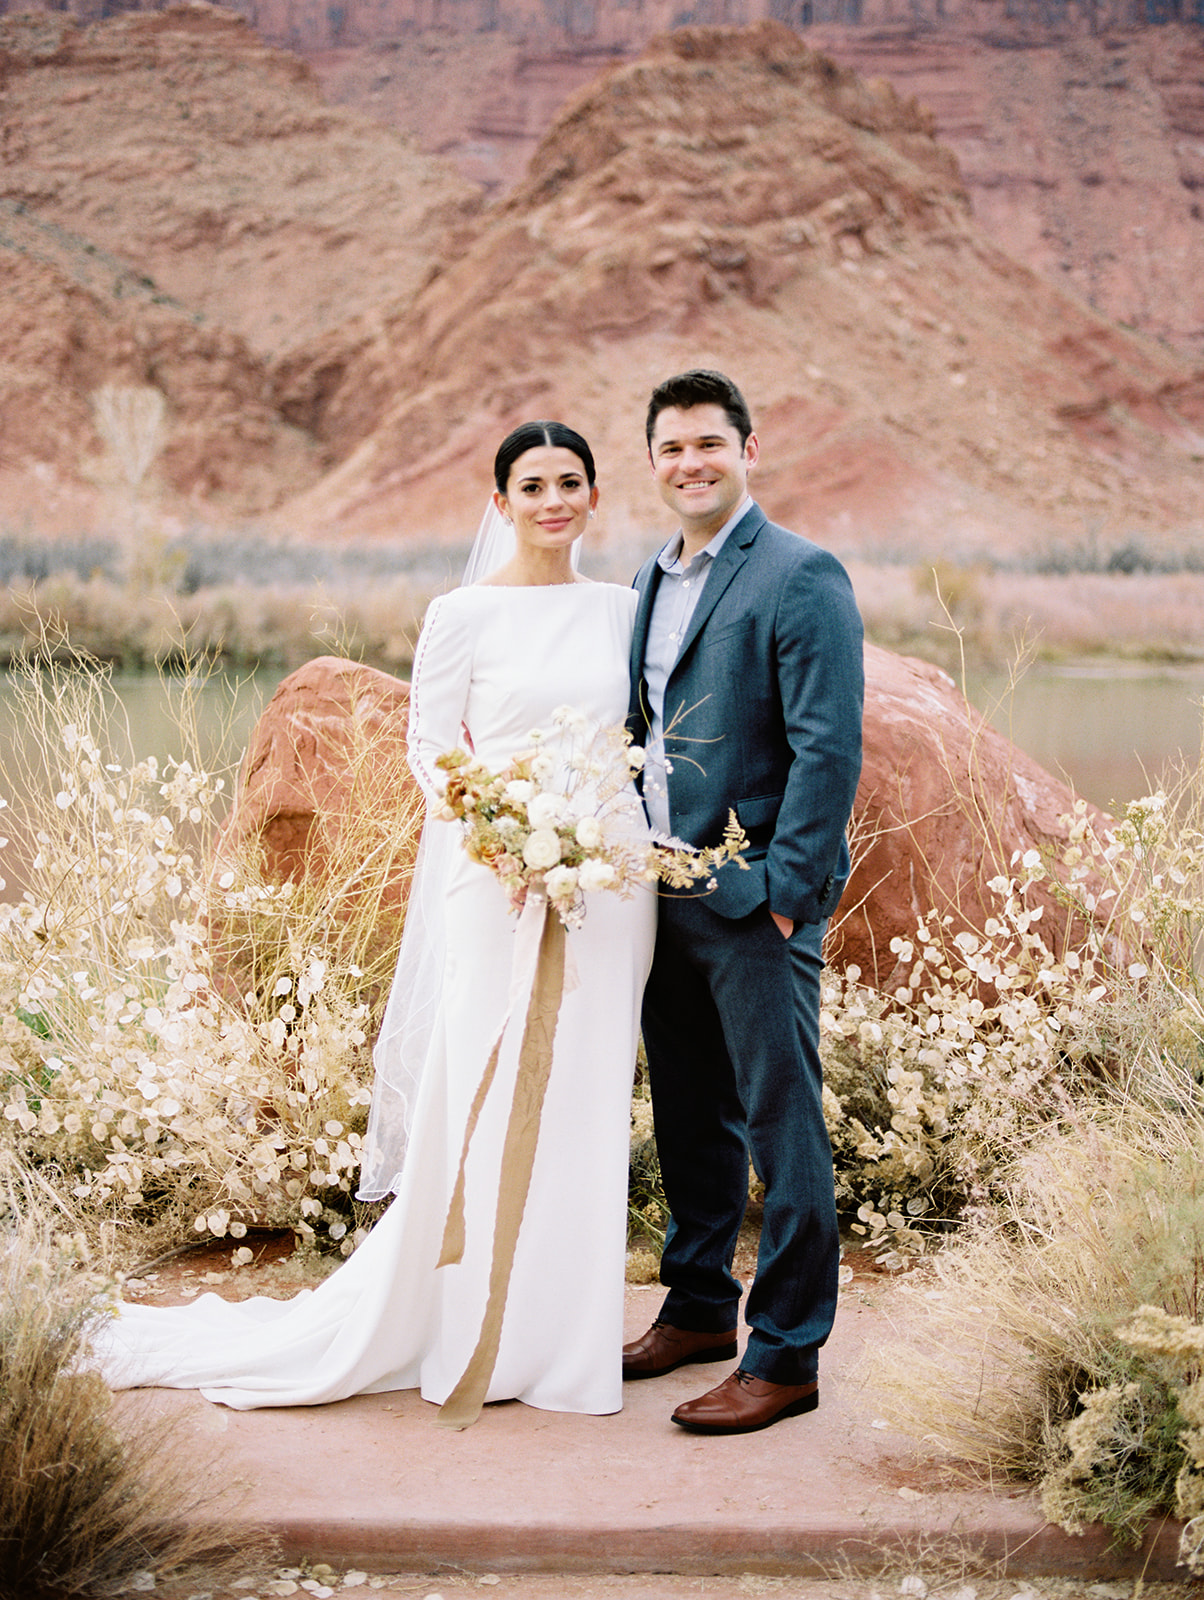 bride and groom at their intimate destination wedding in moab utah
